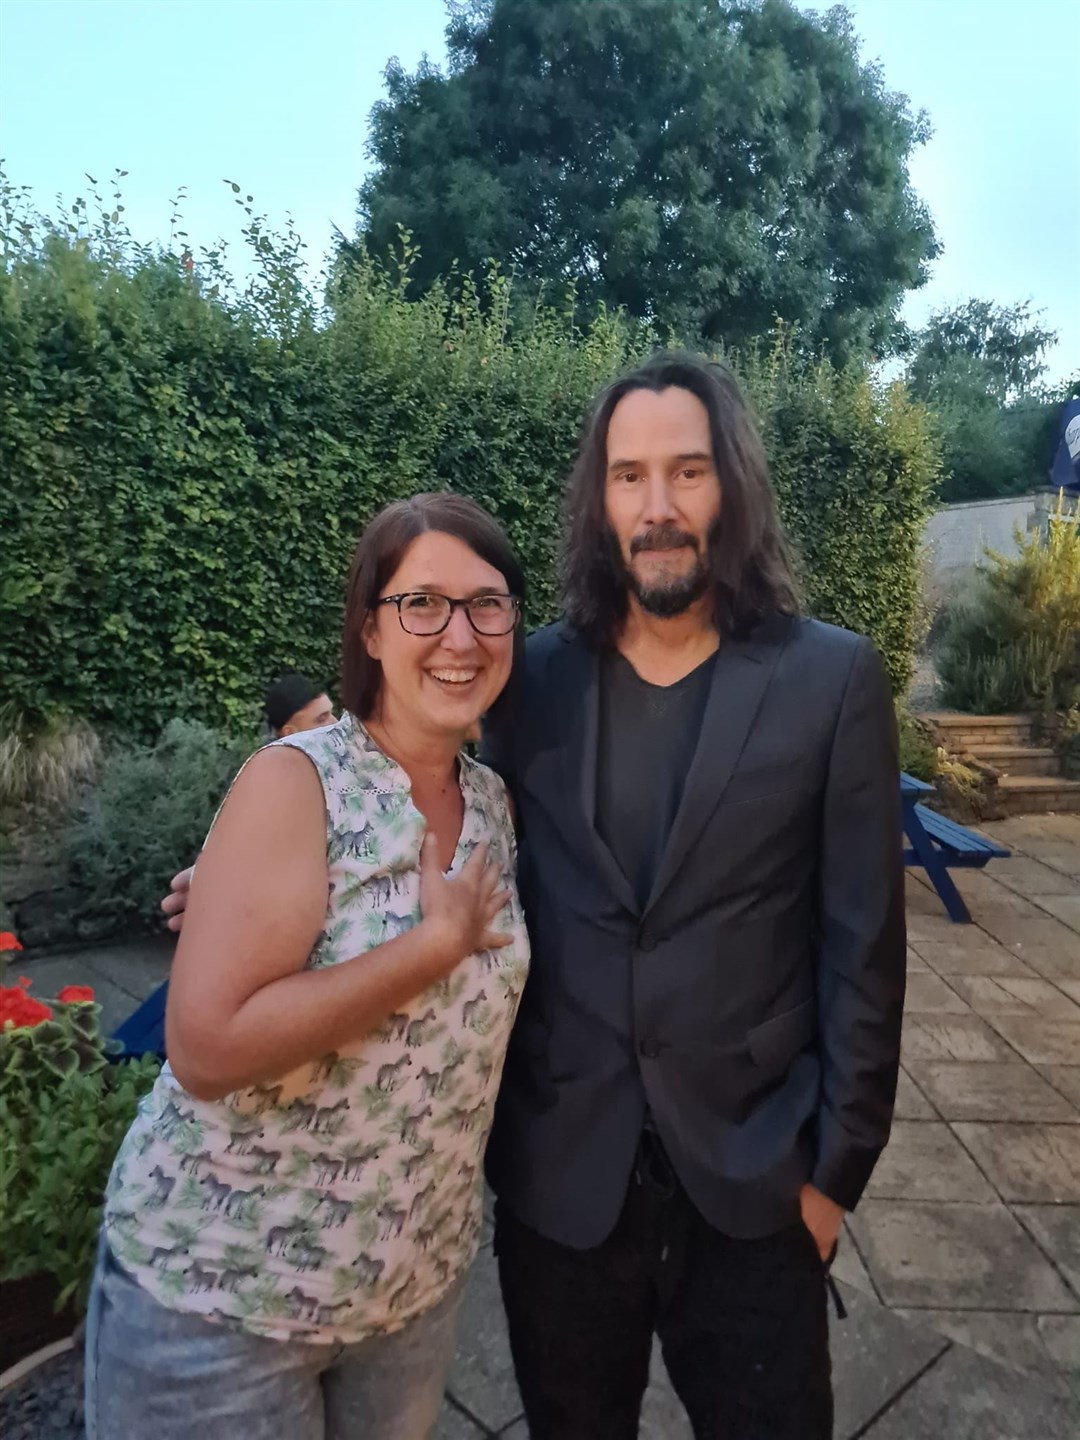 Dianne King, 46, poses with film star Keanu Reeves at her local pub (Dianne King/PA)